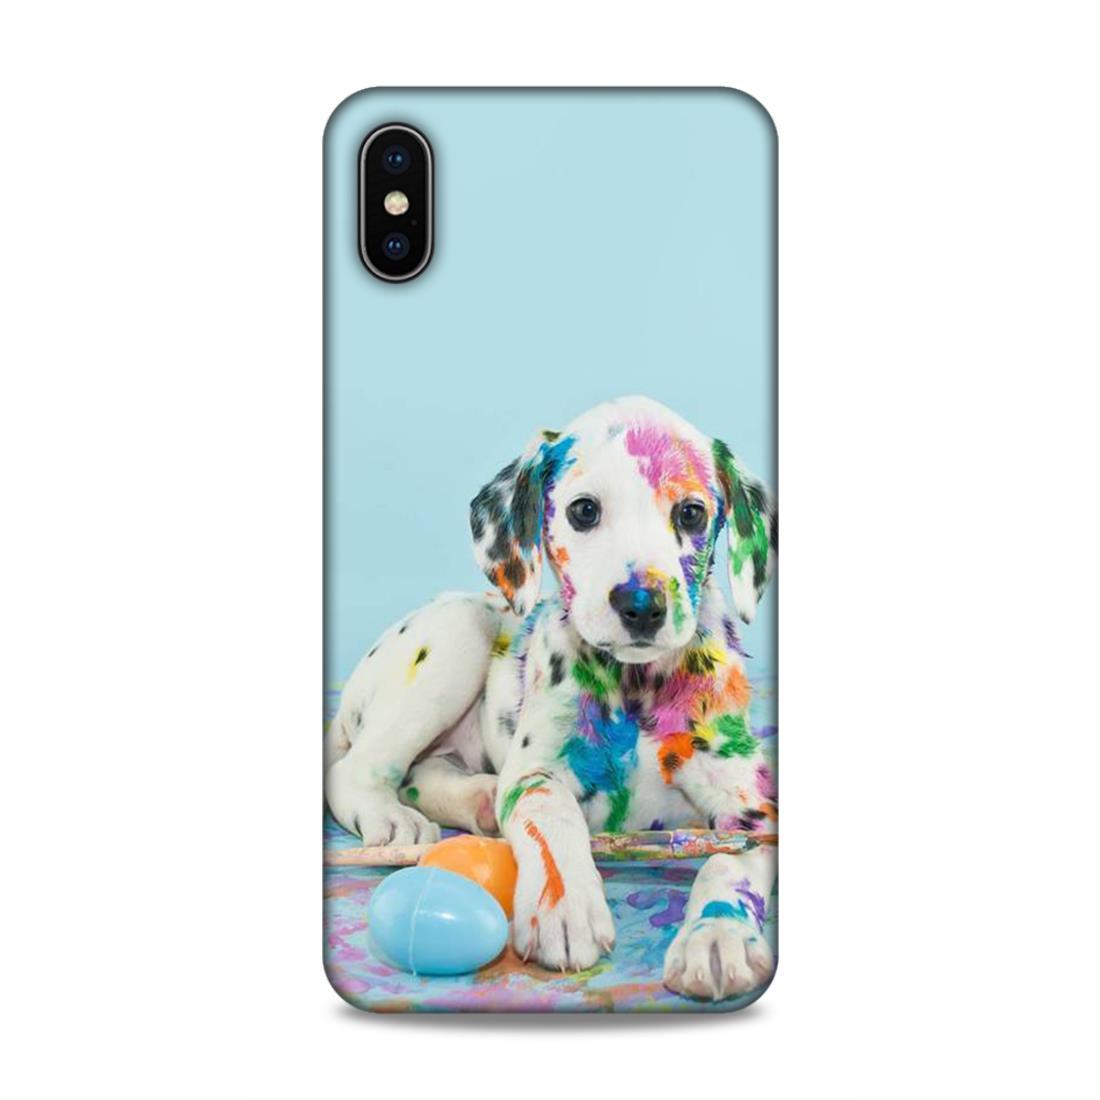 Cute Dog Lover iPhone XS Max Mobile Case Cover